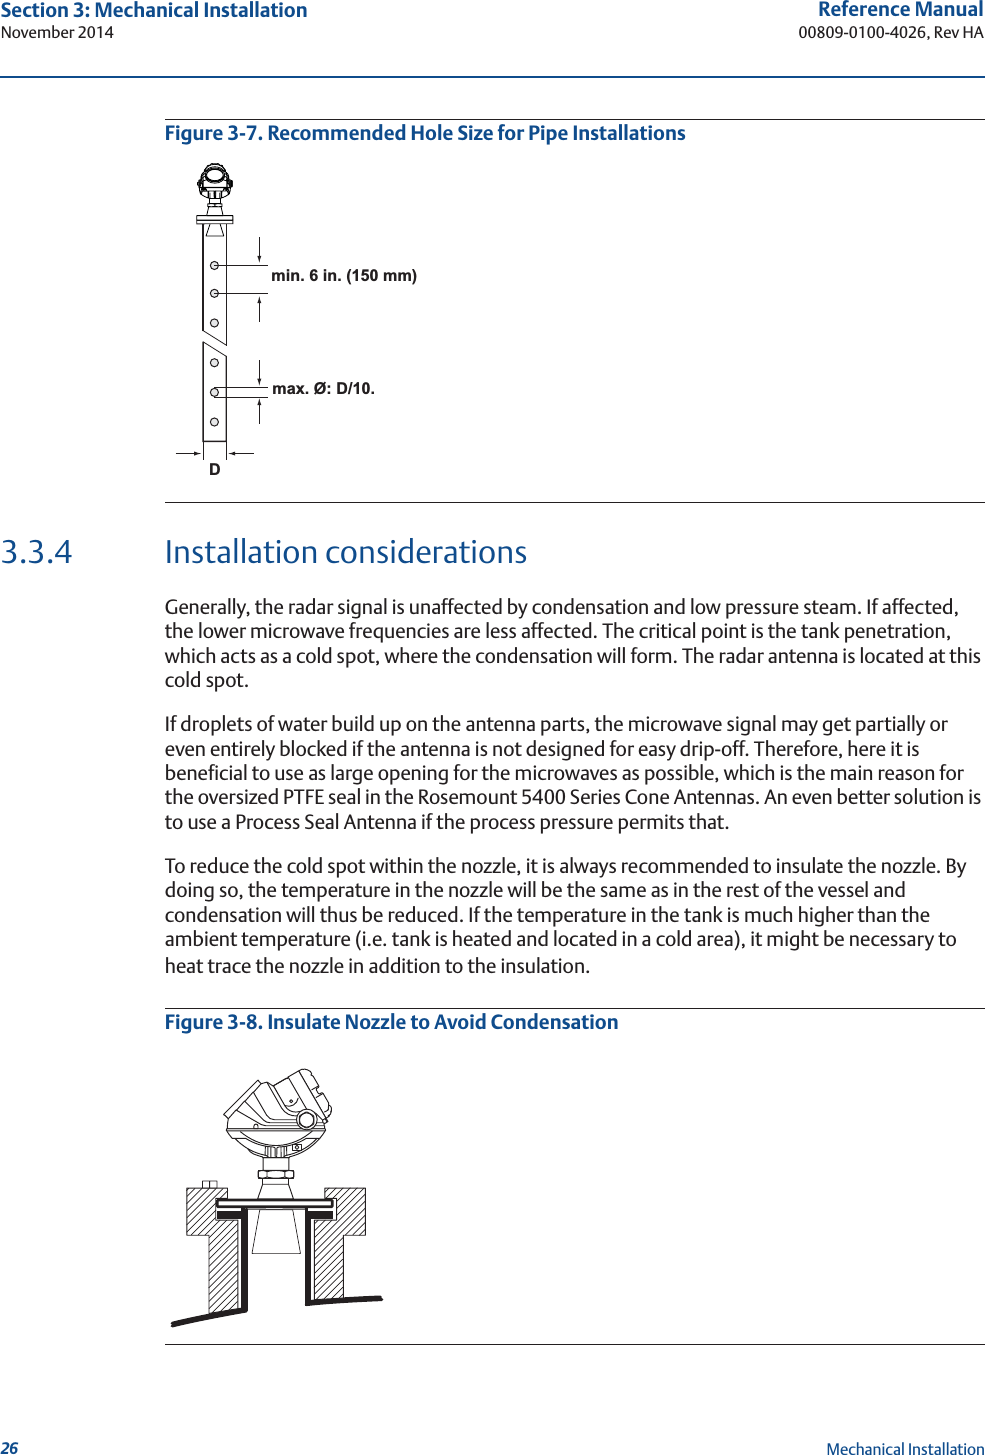 26Reference Manual00809-0100-4026, Rev HASection 3: Mechanical InstallationNovember 2014Mechanical InstallationFigure 3-7. Recommended Hole Size for Pipe Installations3.3.4 Installation considerationsGenerally, the radar signal is unaffected by condensation and low pressure steam. If affected, the lower microwave frequencies are less affected. The critical point is the tank penetration, which acts as a cold spot, where the condensation will form. The radar antenna is located at this cold spot. If droplets of water build up on the antenna parts, the microwave signal may get partially or even entirely blocked if the antenna is not designed for easy drip-off. Therefore, here it is beneficial to use as large opening for the microwaves as possible, which is the main reason for the oversized PTFE seal in the Rosemount 5400 Series Cone Antennas. An even better solution is to use a Process Seal Antenna if the process pressure permits that.To reduce the cold spot within the nozzle, it is always recommended to insulate the nozzle. By doing so, the temperature in the nozzle will be the same as in the rest of the vessel and condensation will thus be reduced. If the temperature in the tank is much higher than the ambient temperature (i.e. tank is heated and located in a cold area), it might be necessary to heat trace the nozzle in addition to the insulation.Figure 3-8. Insulate Nozzle to Avoid Condensationmin. 6 in. (150 mm)max. Ø: D/10.D